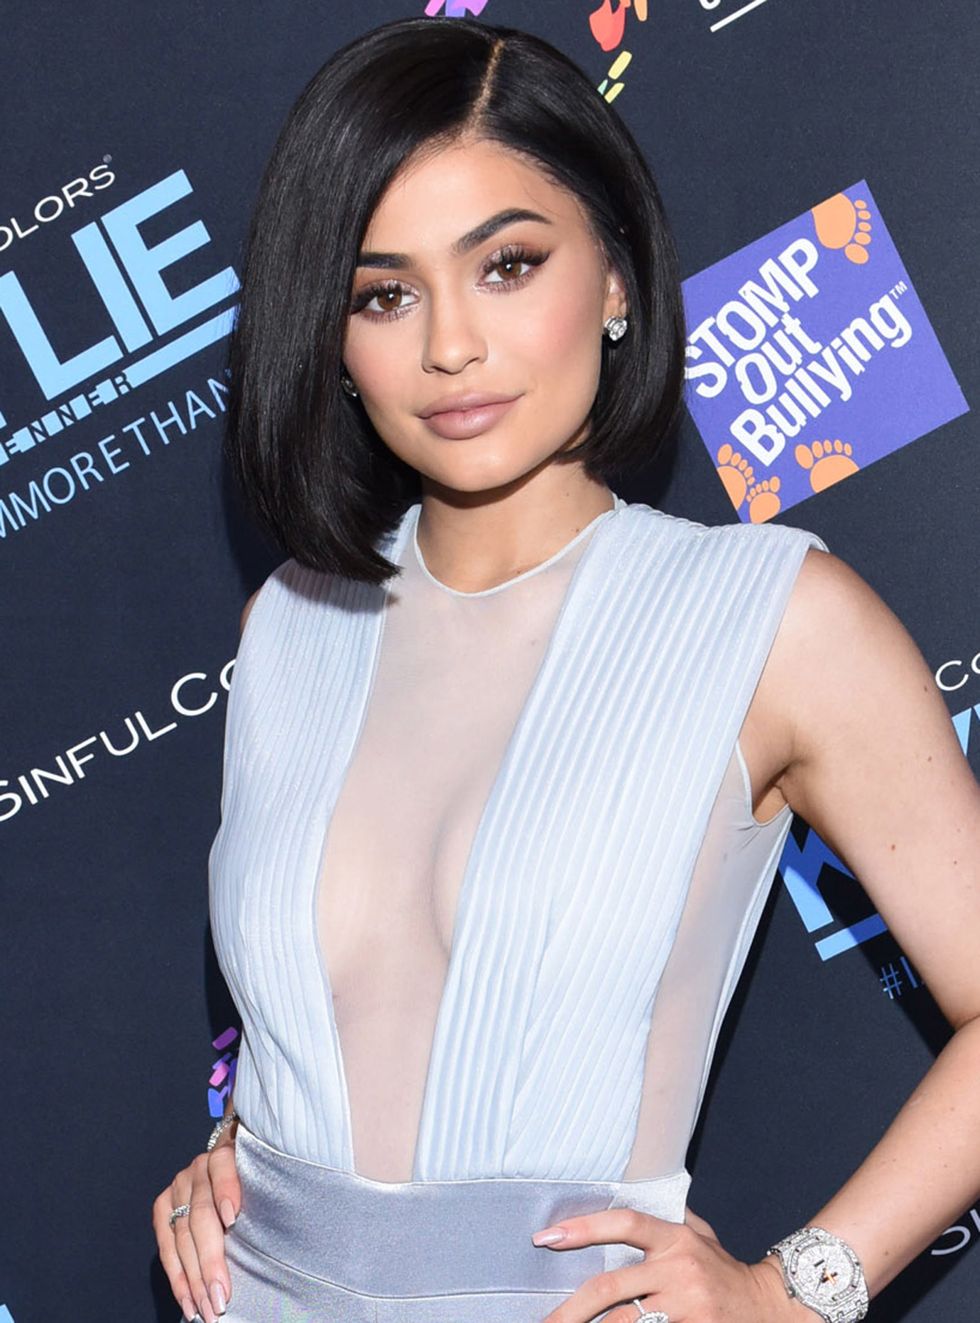 LOS ANGELES, CA - JULY 14:  (EXCLUSIVE COVERAGE) Kylie Jenner attends SinfulColors and Kylie Jenner Announce charitybuzz.com Auction for Anti Bullying on July 14, 2016 in Los Angeles, California.  (Photo by Vivien Killilea/Getty Images for SinfulColors)